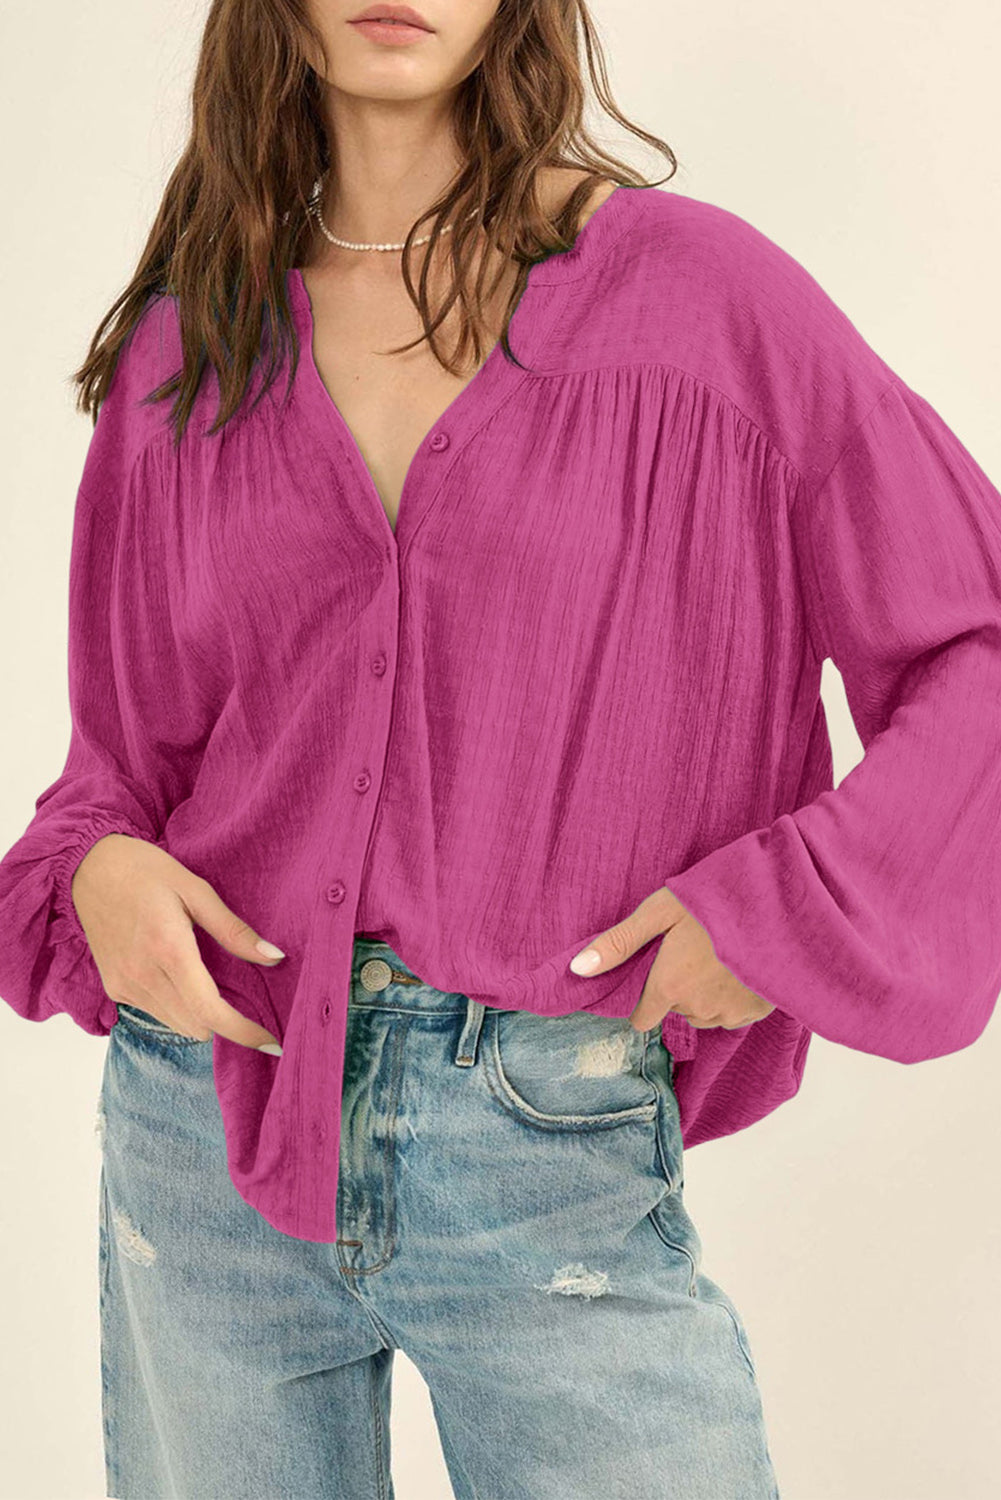 Rose Solid Color Jacquard Puff Sleeve Button up Shirt | Tops/Blouses & Shirts